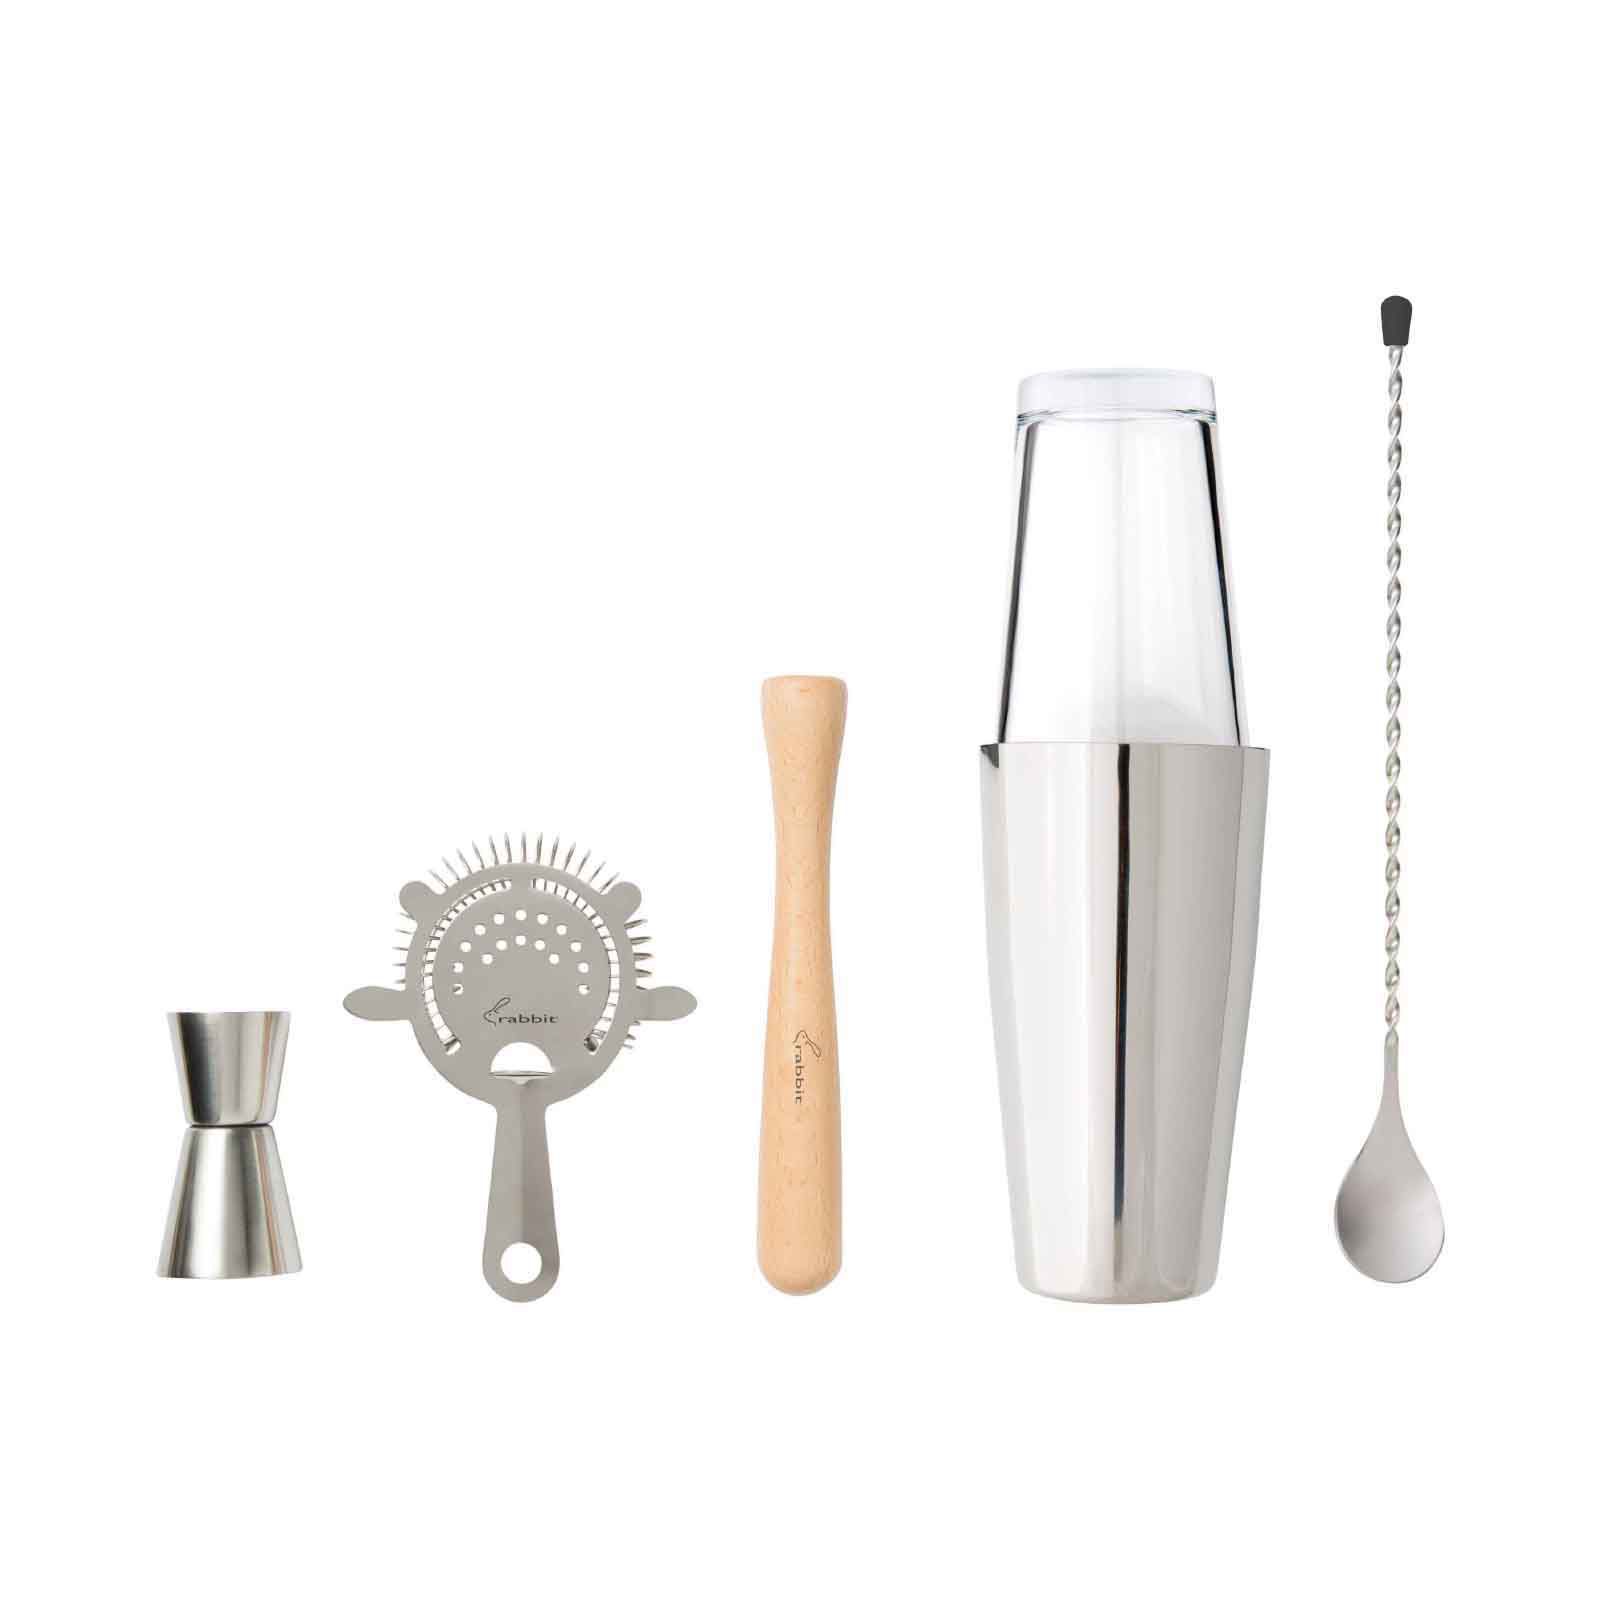 5pc Cocktail Shaker Set with Two Martini Glasses, Set - Foods Co.